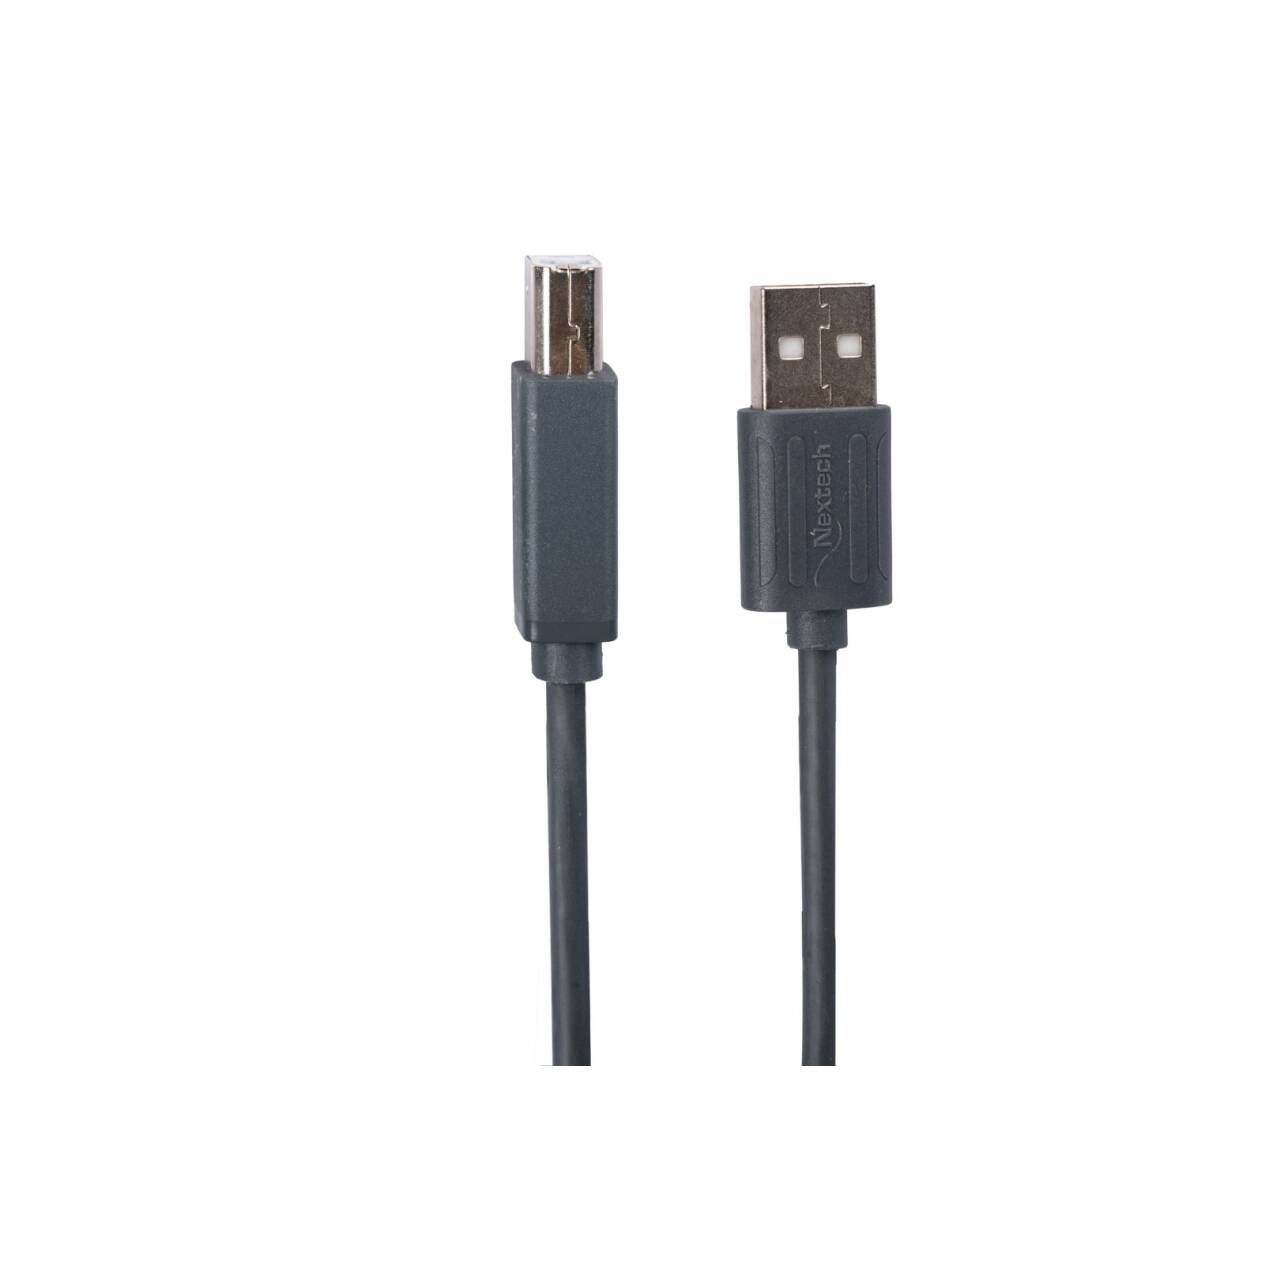 Printer Cable USB C to USB B 3m USB 2.0 - USB-C Cables, Cables